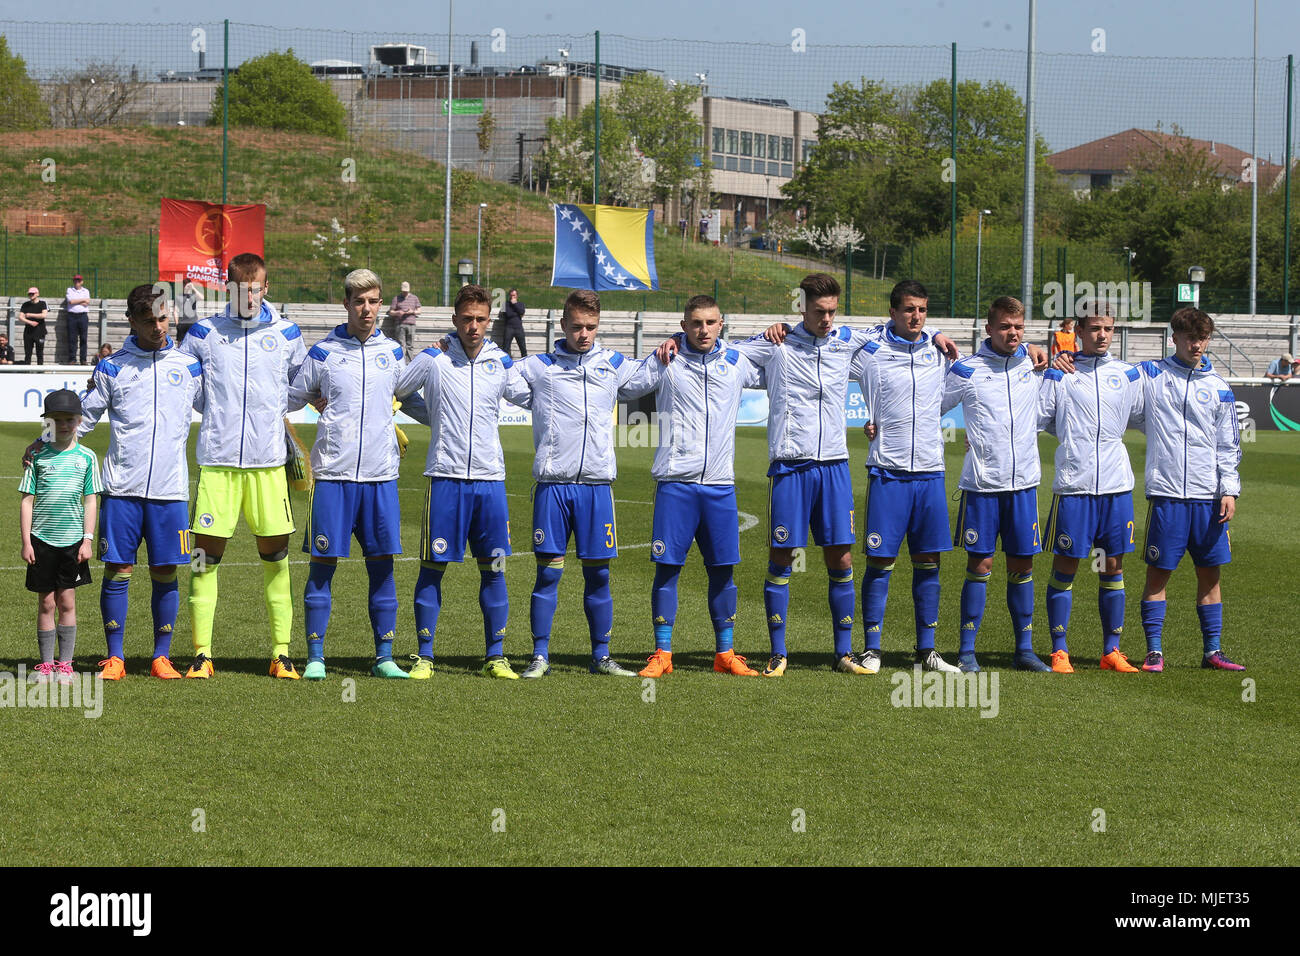 Loughborough, UK. 5th May, 2018. The Bosnia and Herzegovinan team before the 2018 UEFA European Under-17 Championship Group C match between Denmark and Bosnia and Herzegovina at Loughborough University Stadium on May 5th 2018 in Loughborough, England. (Photo by Paul Chesterton/phcimages.com) Credit: PHC Images/Alamy Live News Stock Photo